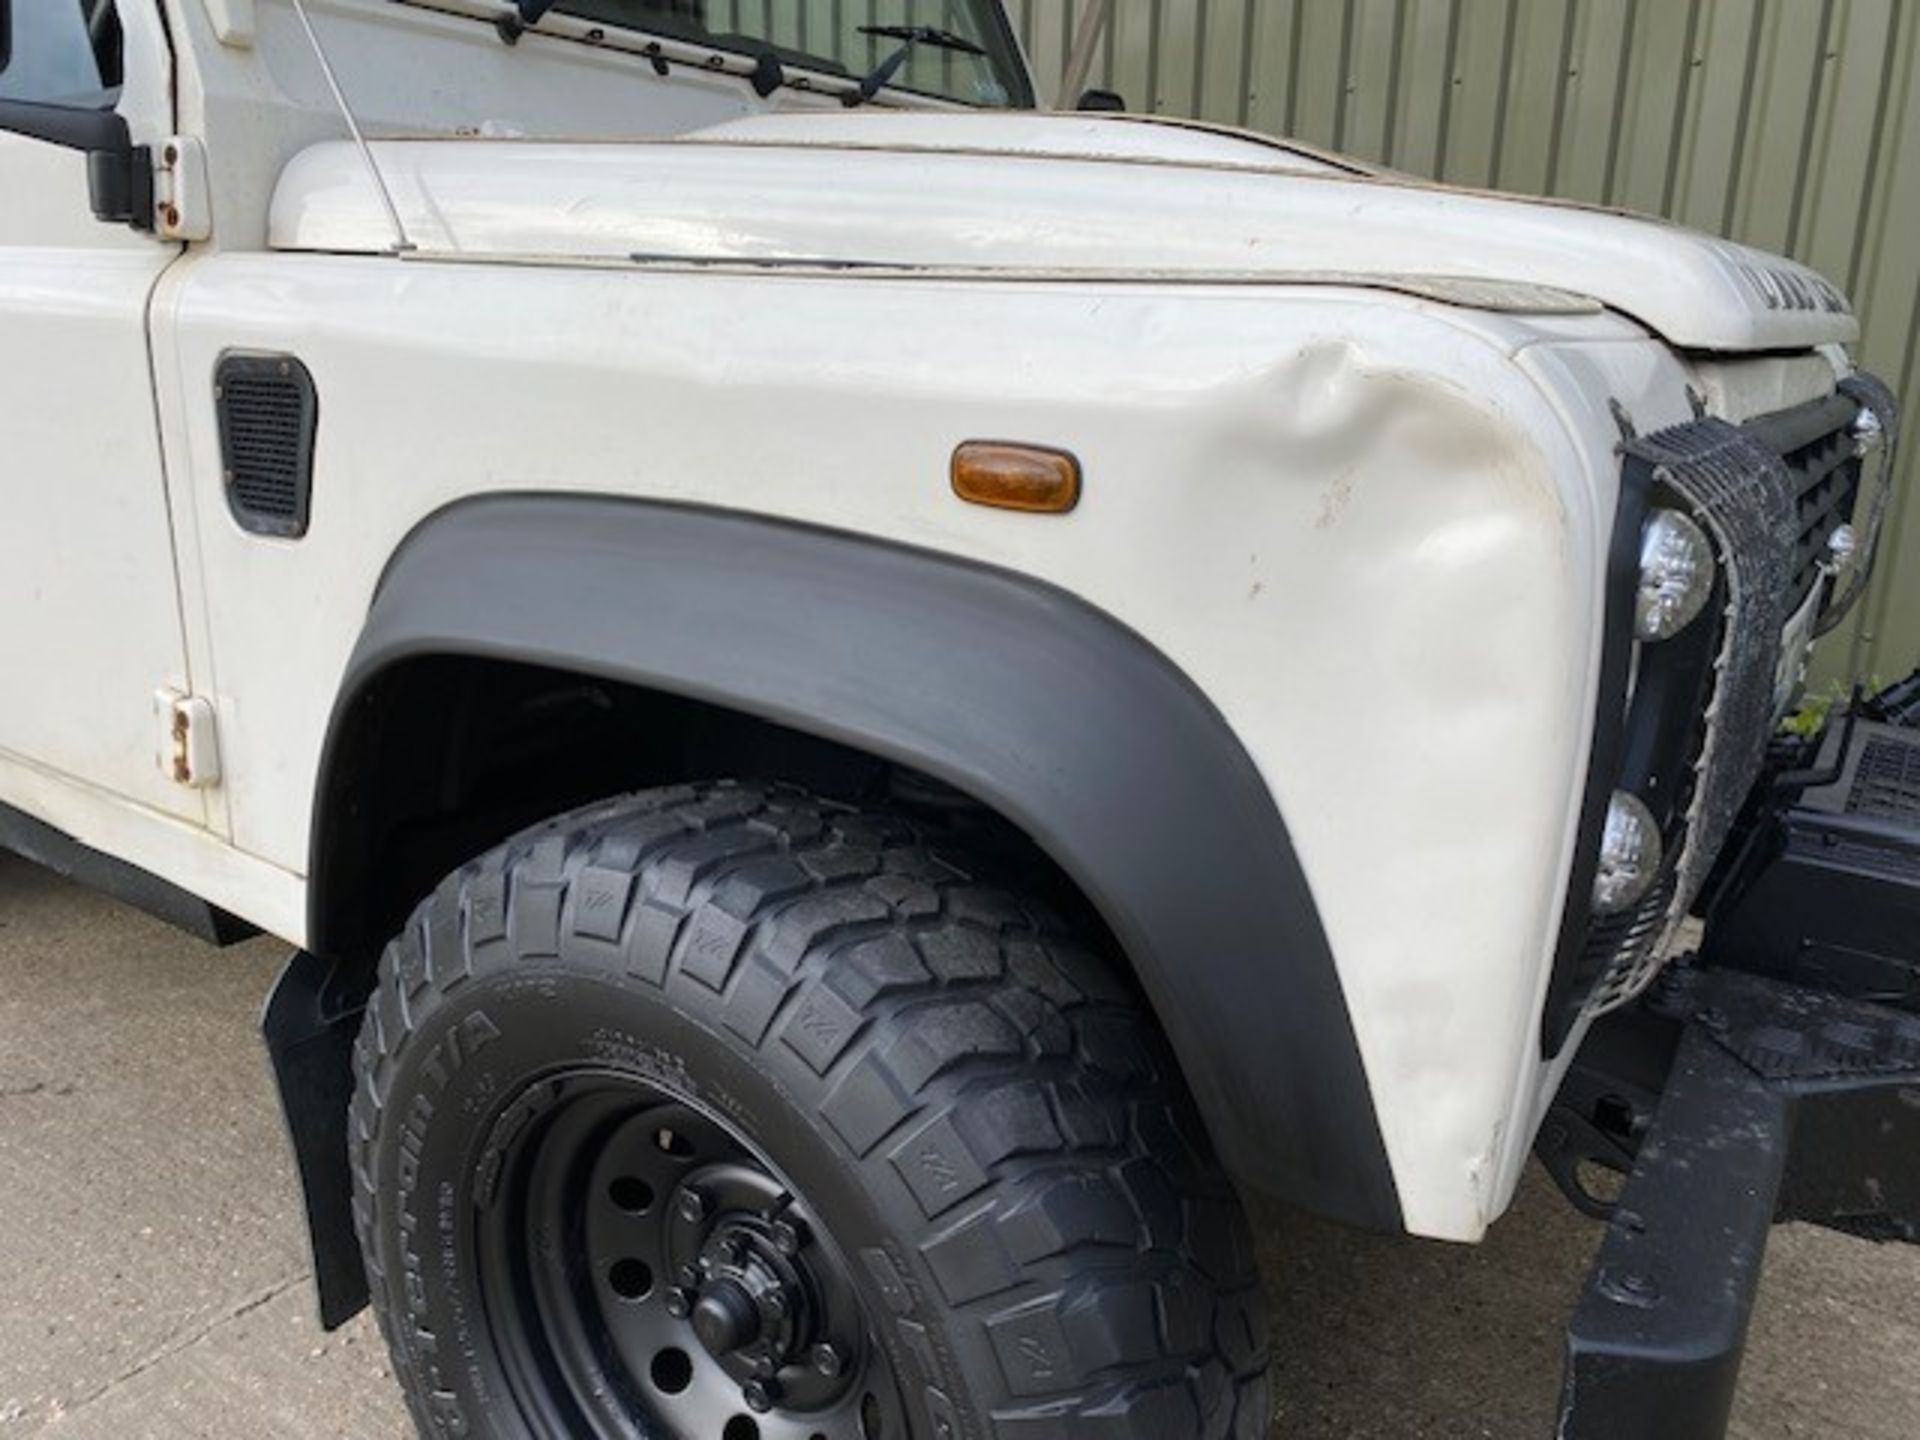 Land Rover Defender 110 Utility - Image 20 of 60